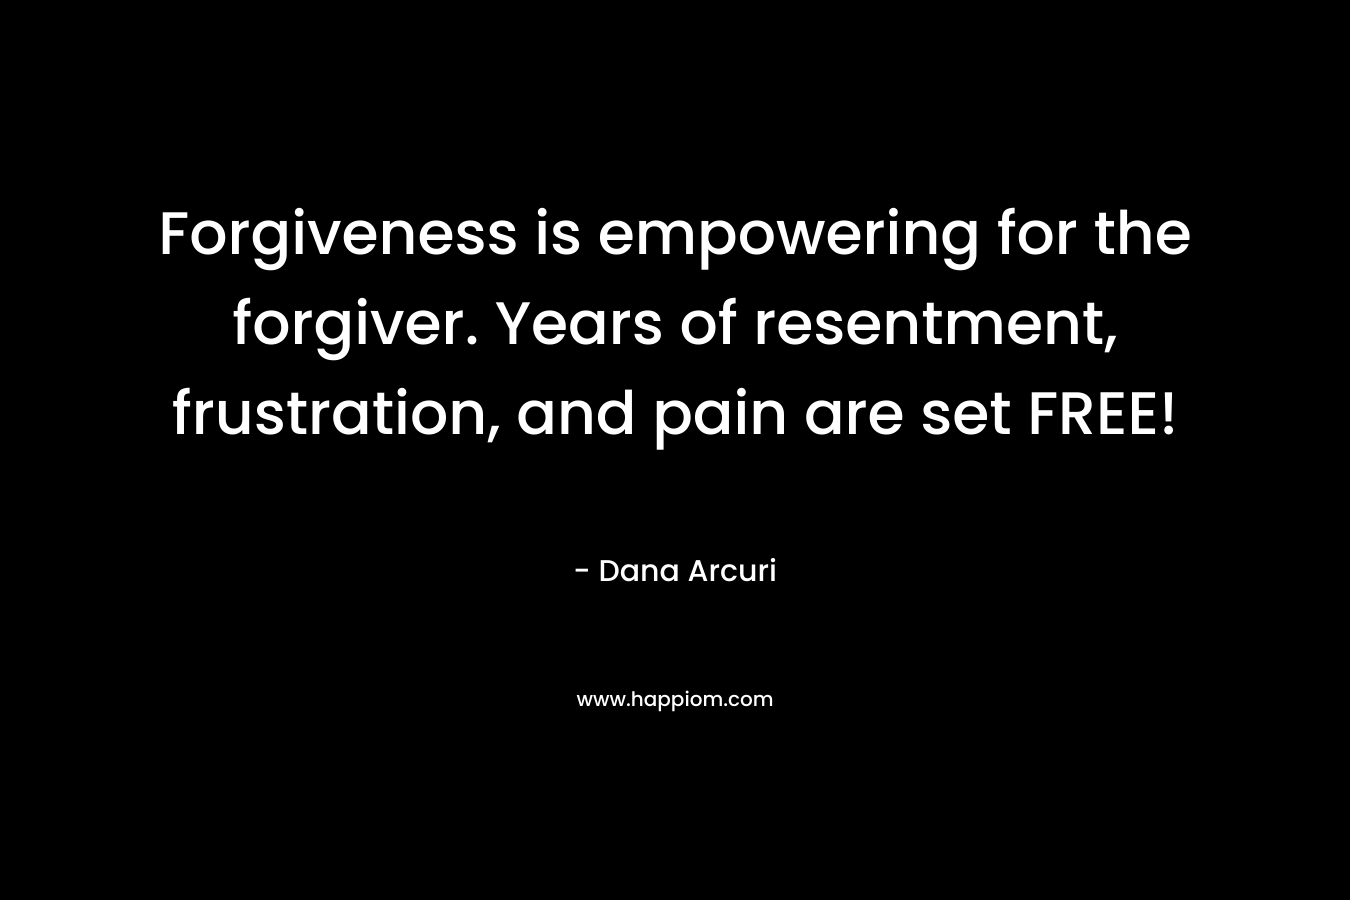 Forgiveness is empowering for the forgiver. Years of resentment, frustration, and pain are set FREE!